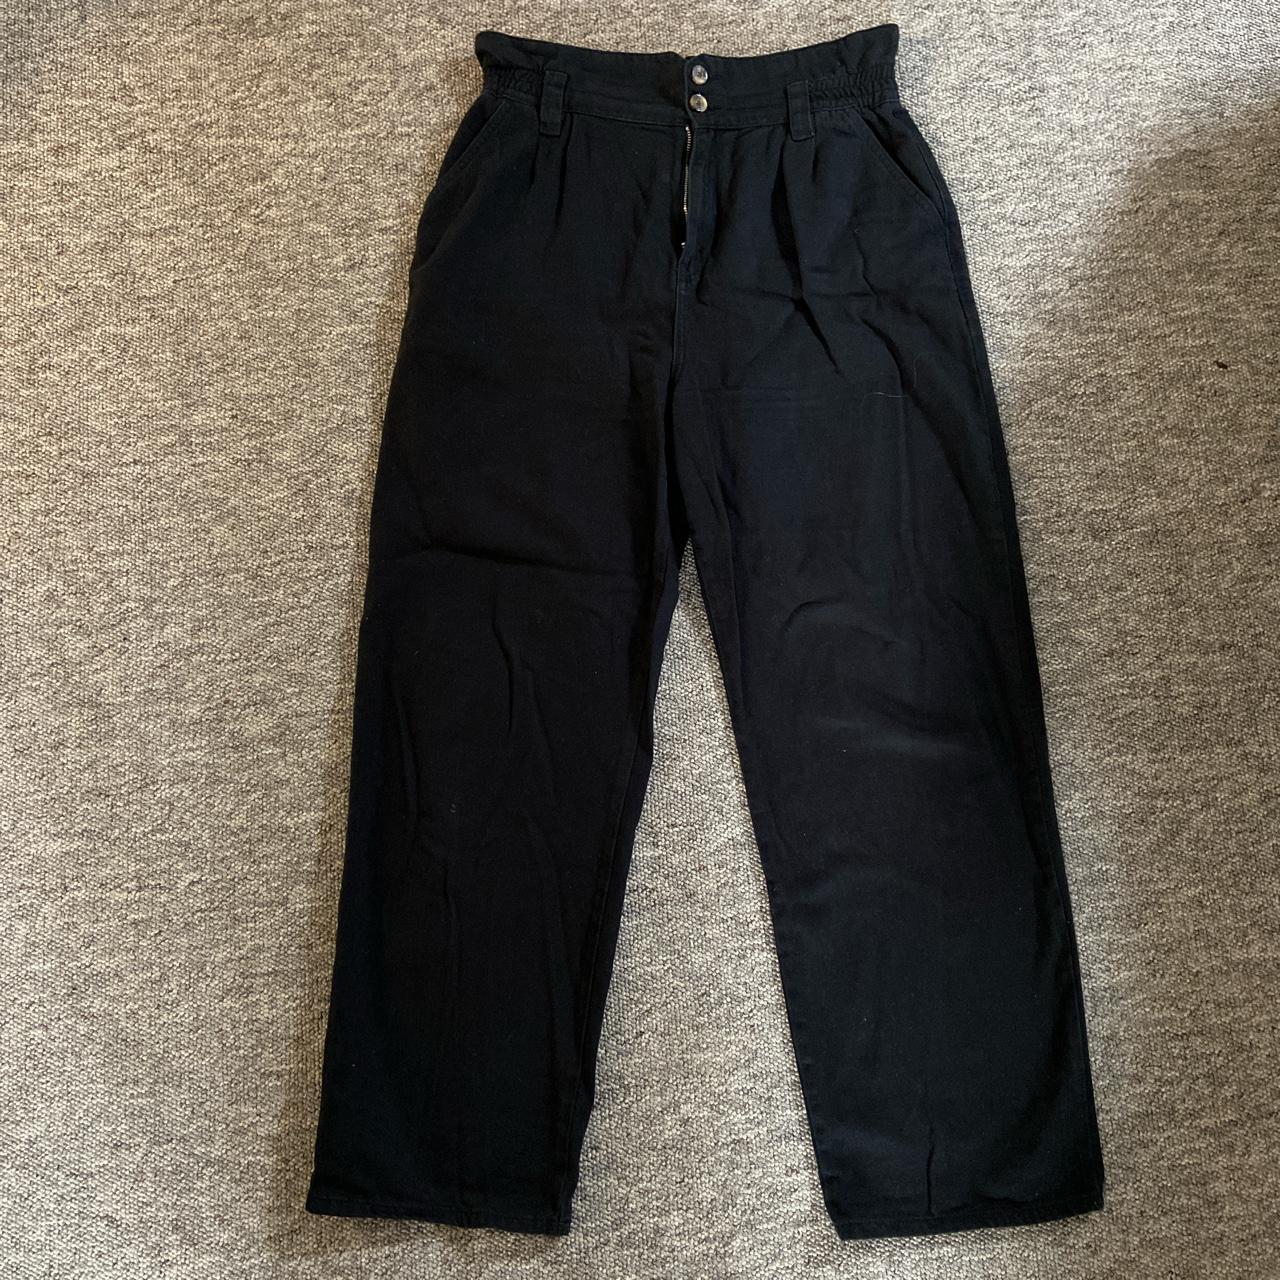 Urban Outfitters Women's Black Trousers